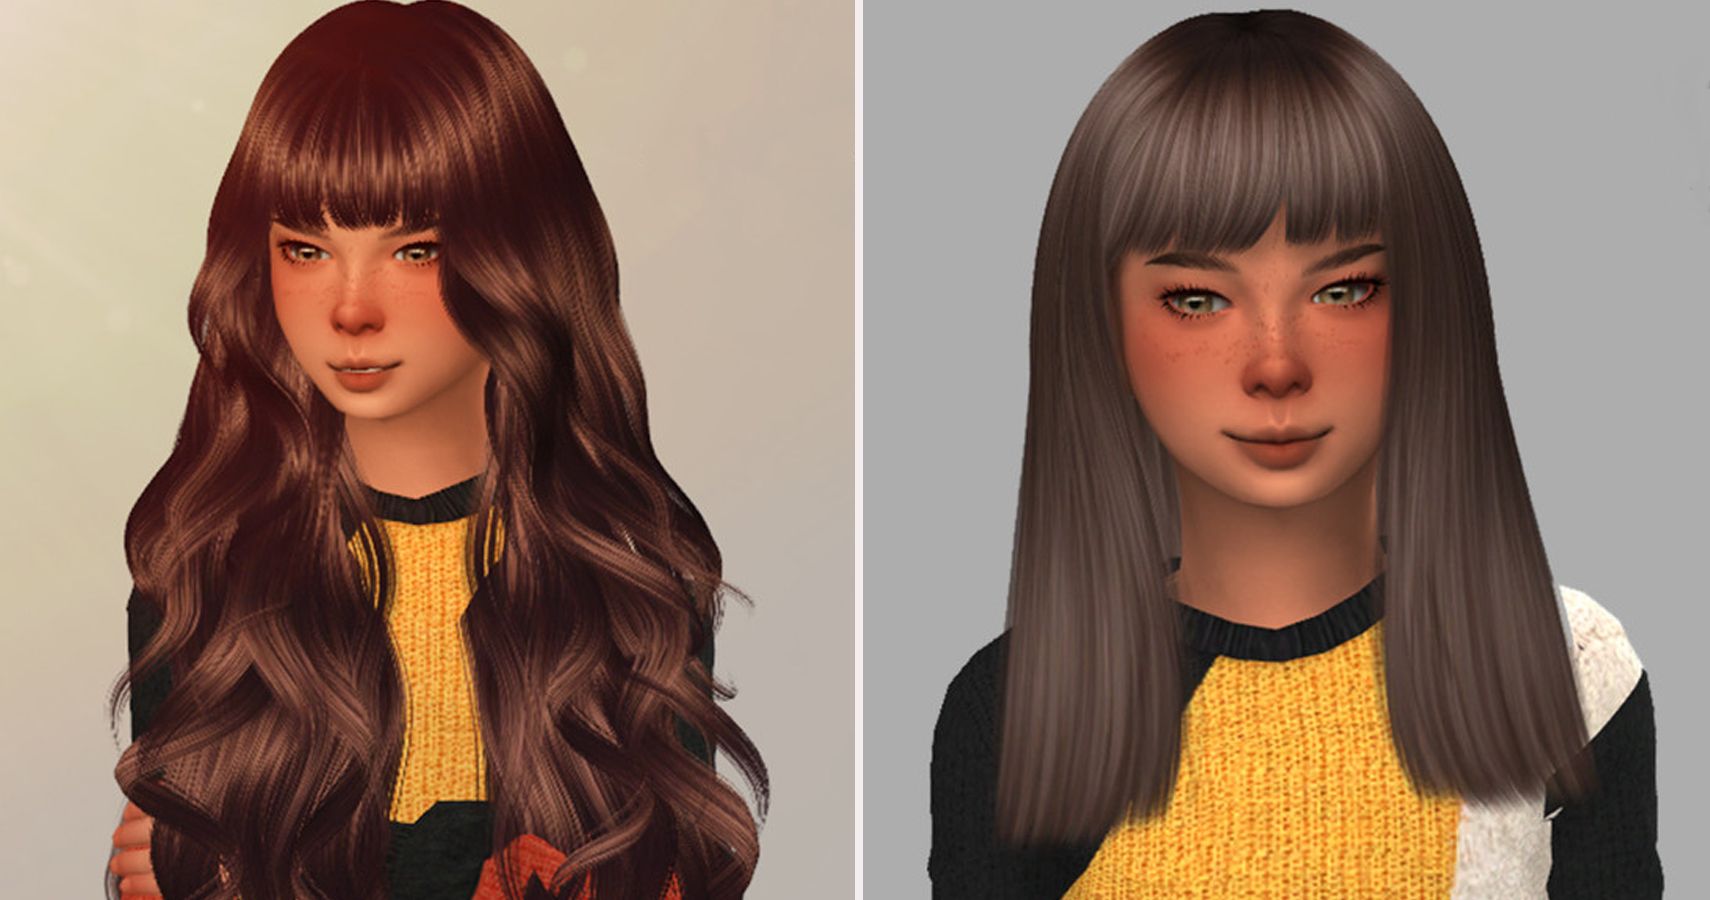 Left side child sim with long curly hair. Right side child sim with shoulder length straight hair.